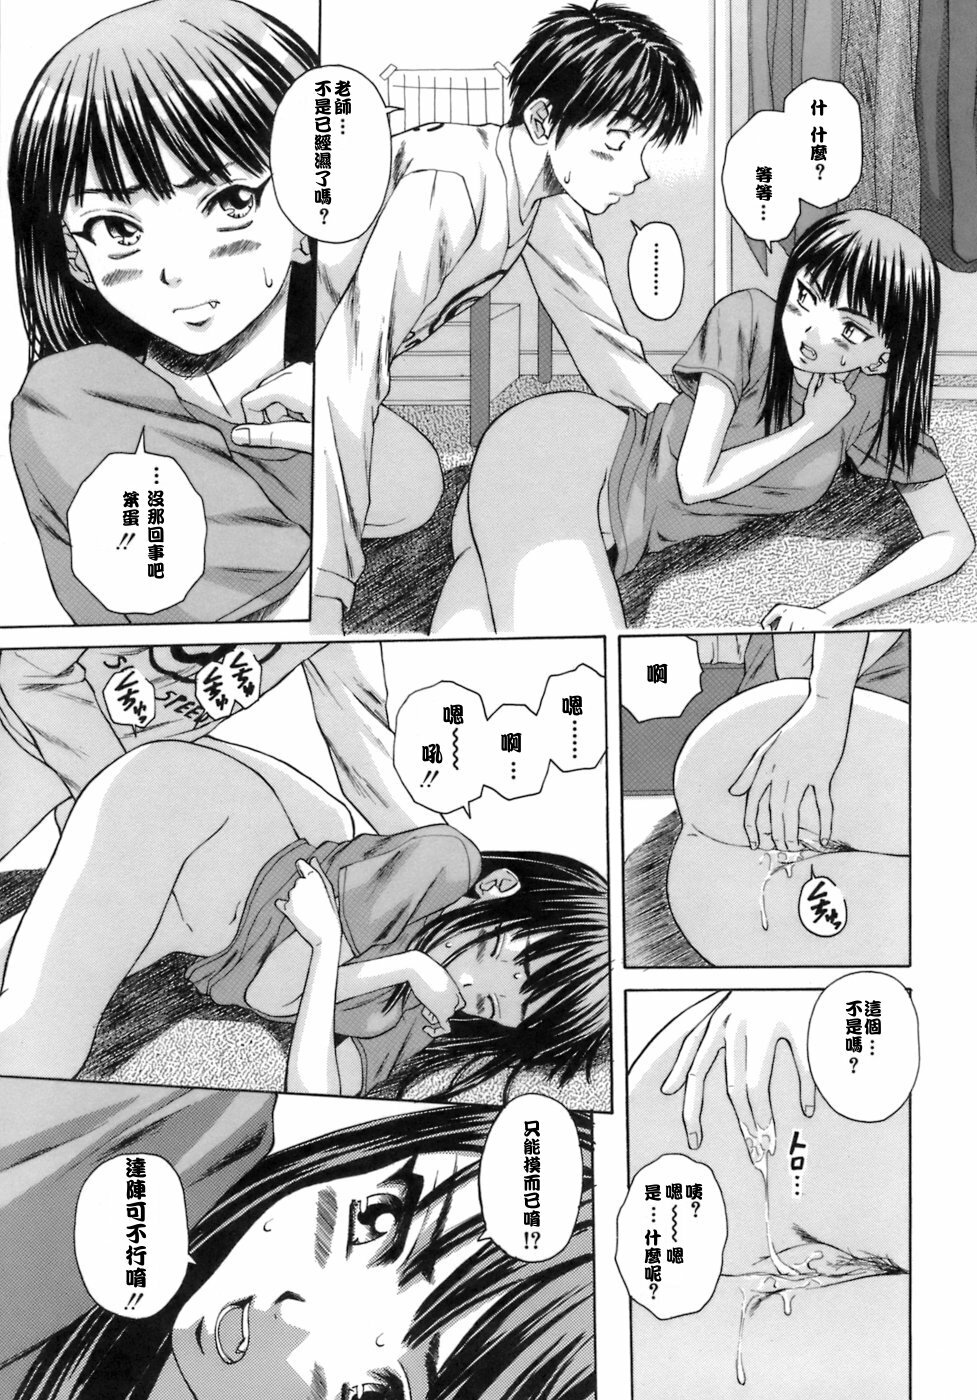 [Fuuga] Kyoushi to Seito to - Teacher and Student [Chinese] [悠月工房] page 30 full